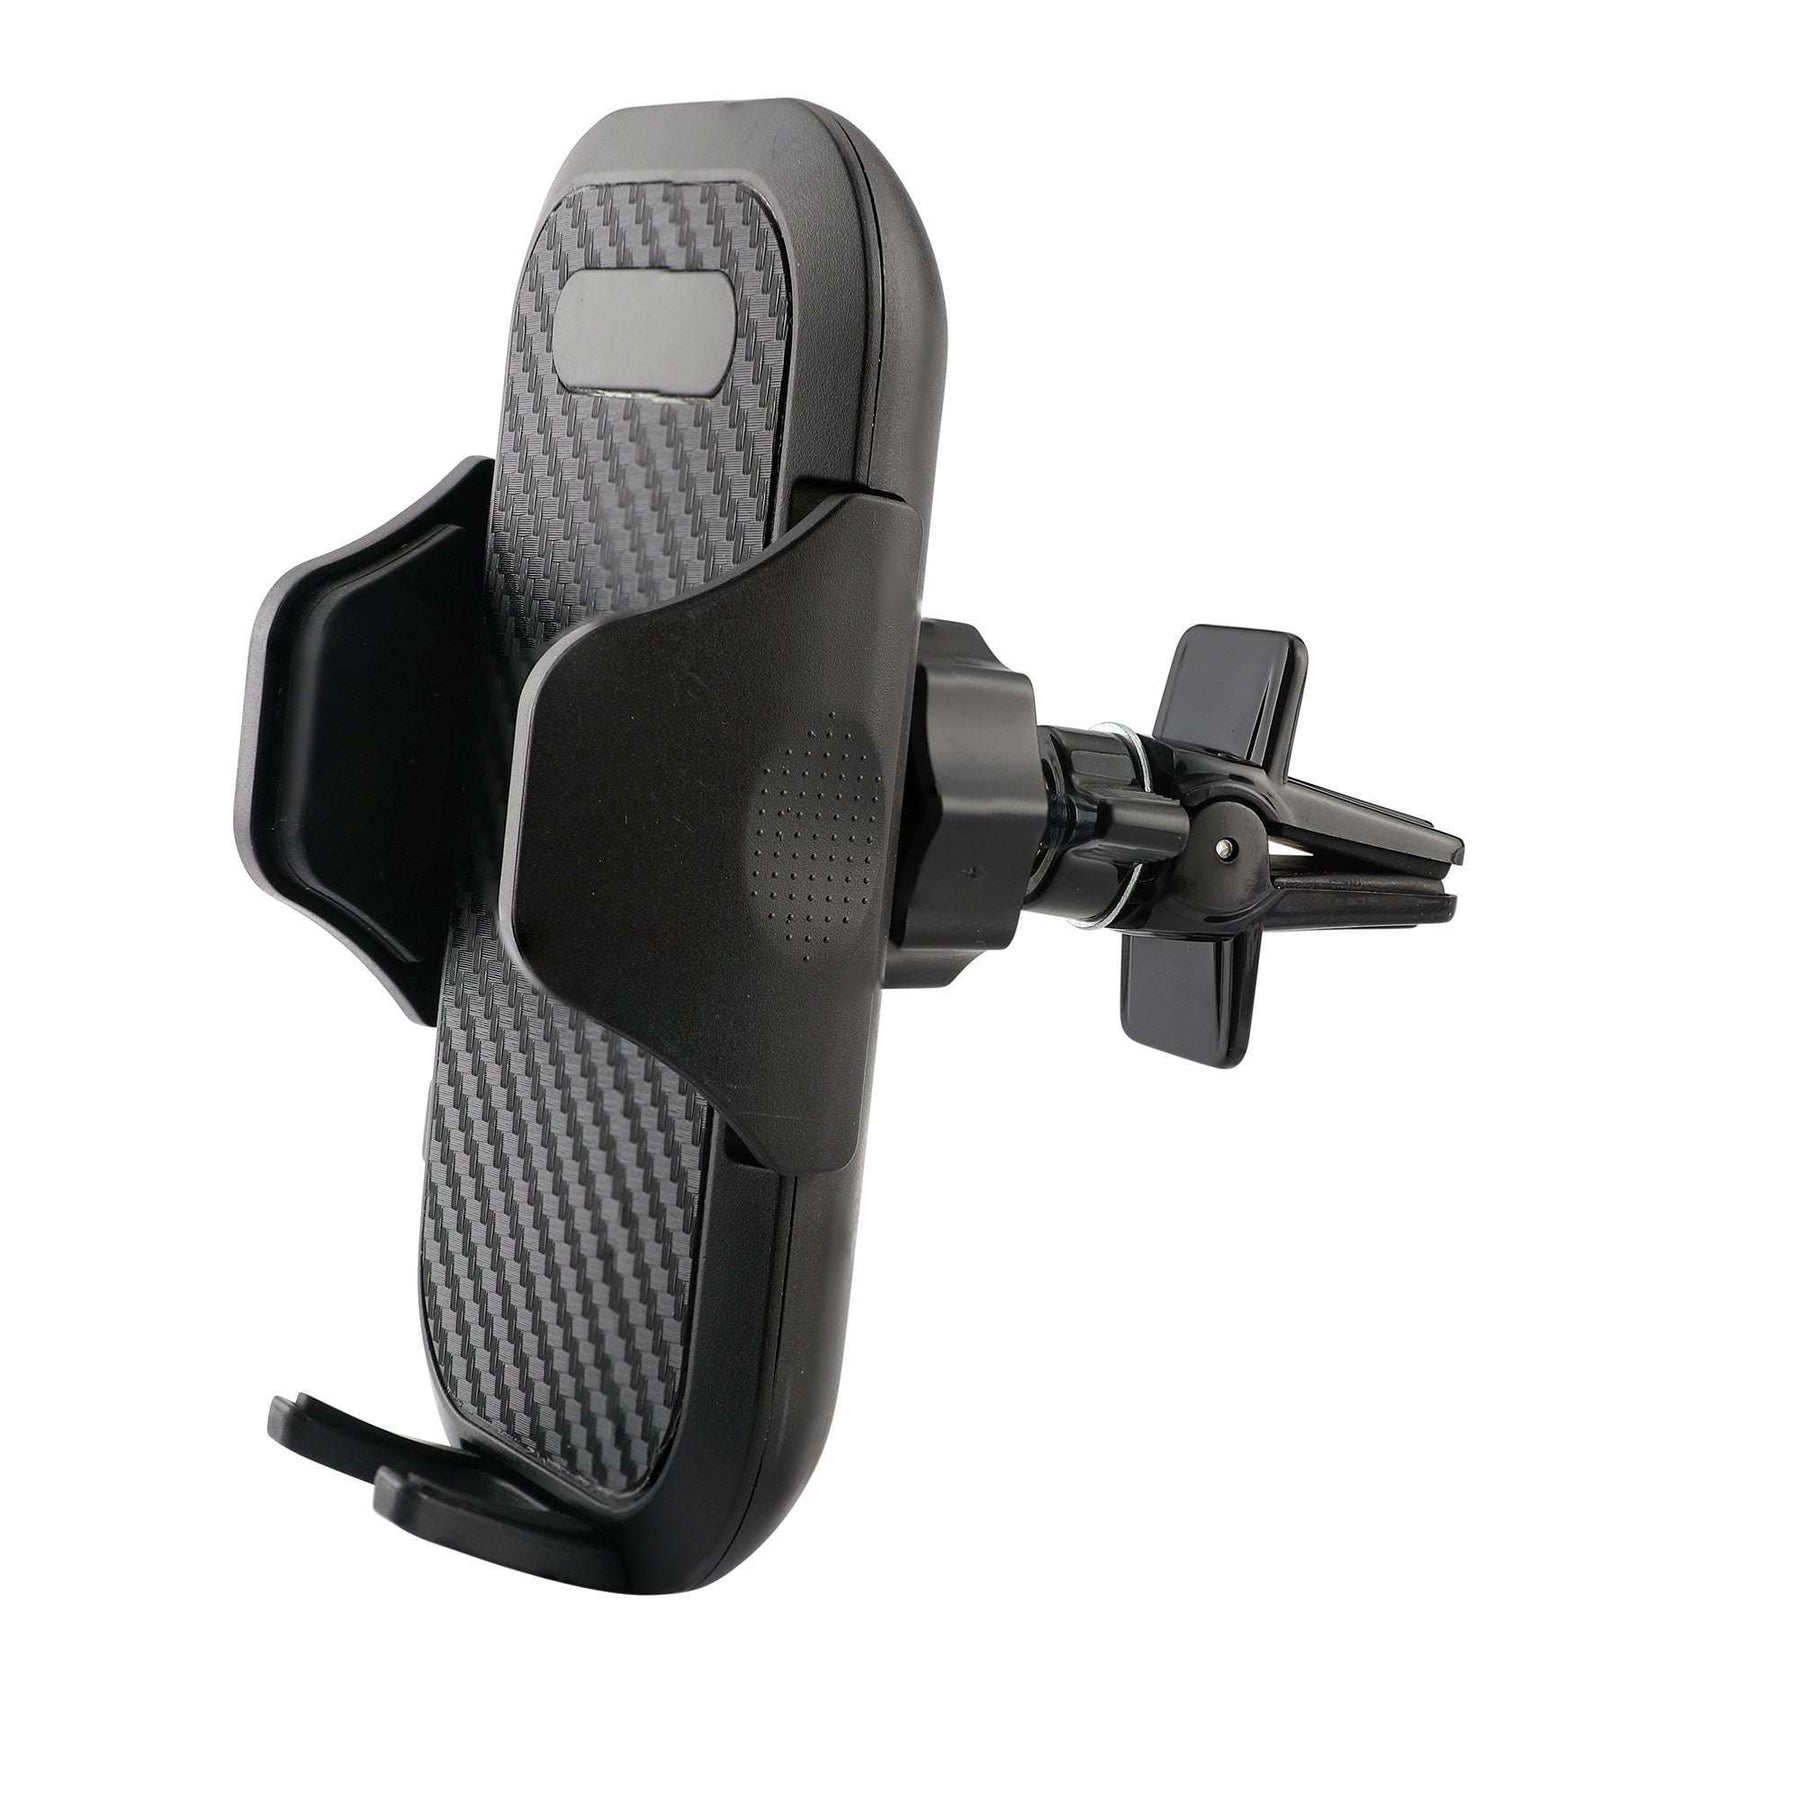 UNIVERSAL CAR PHONE MOUNT for iPhone 14 Pro Max - Adjustable Long